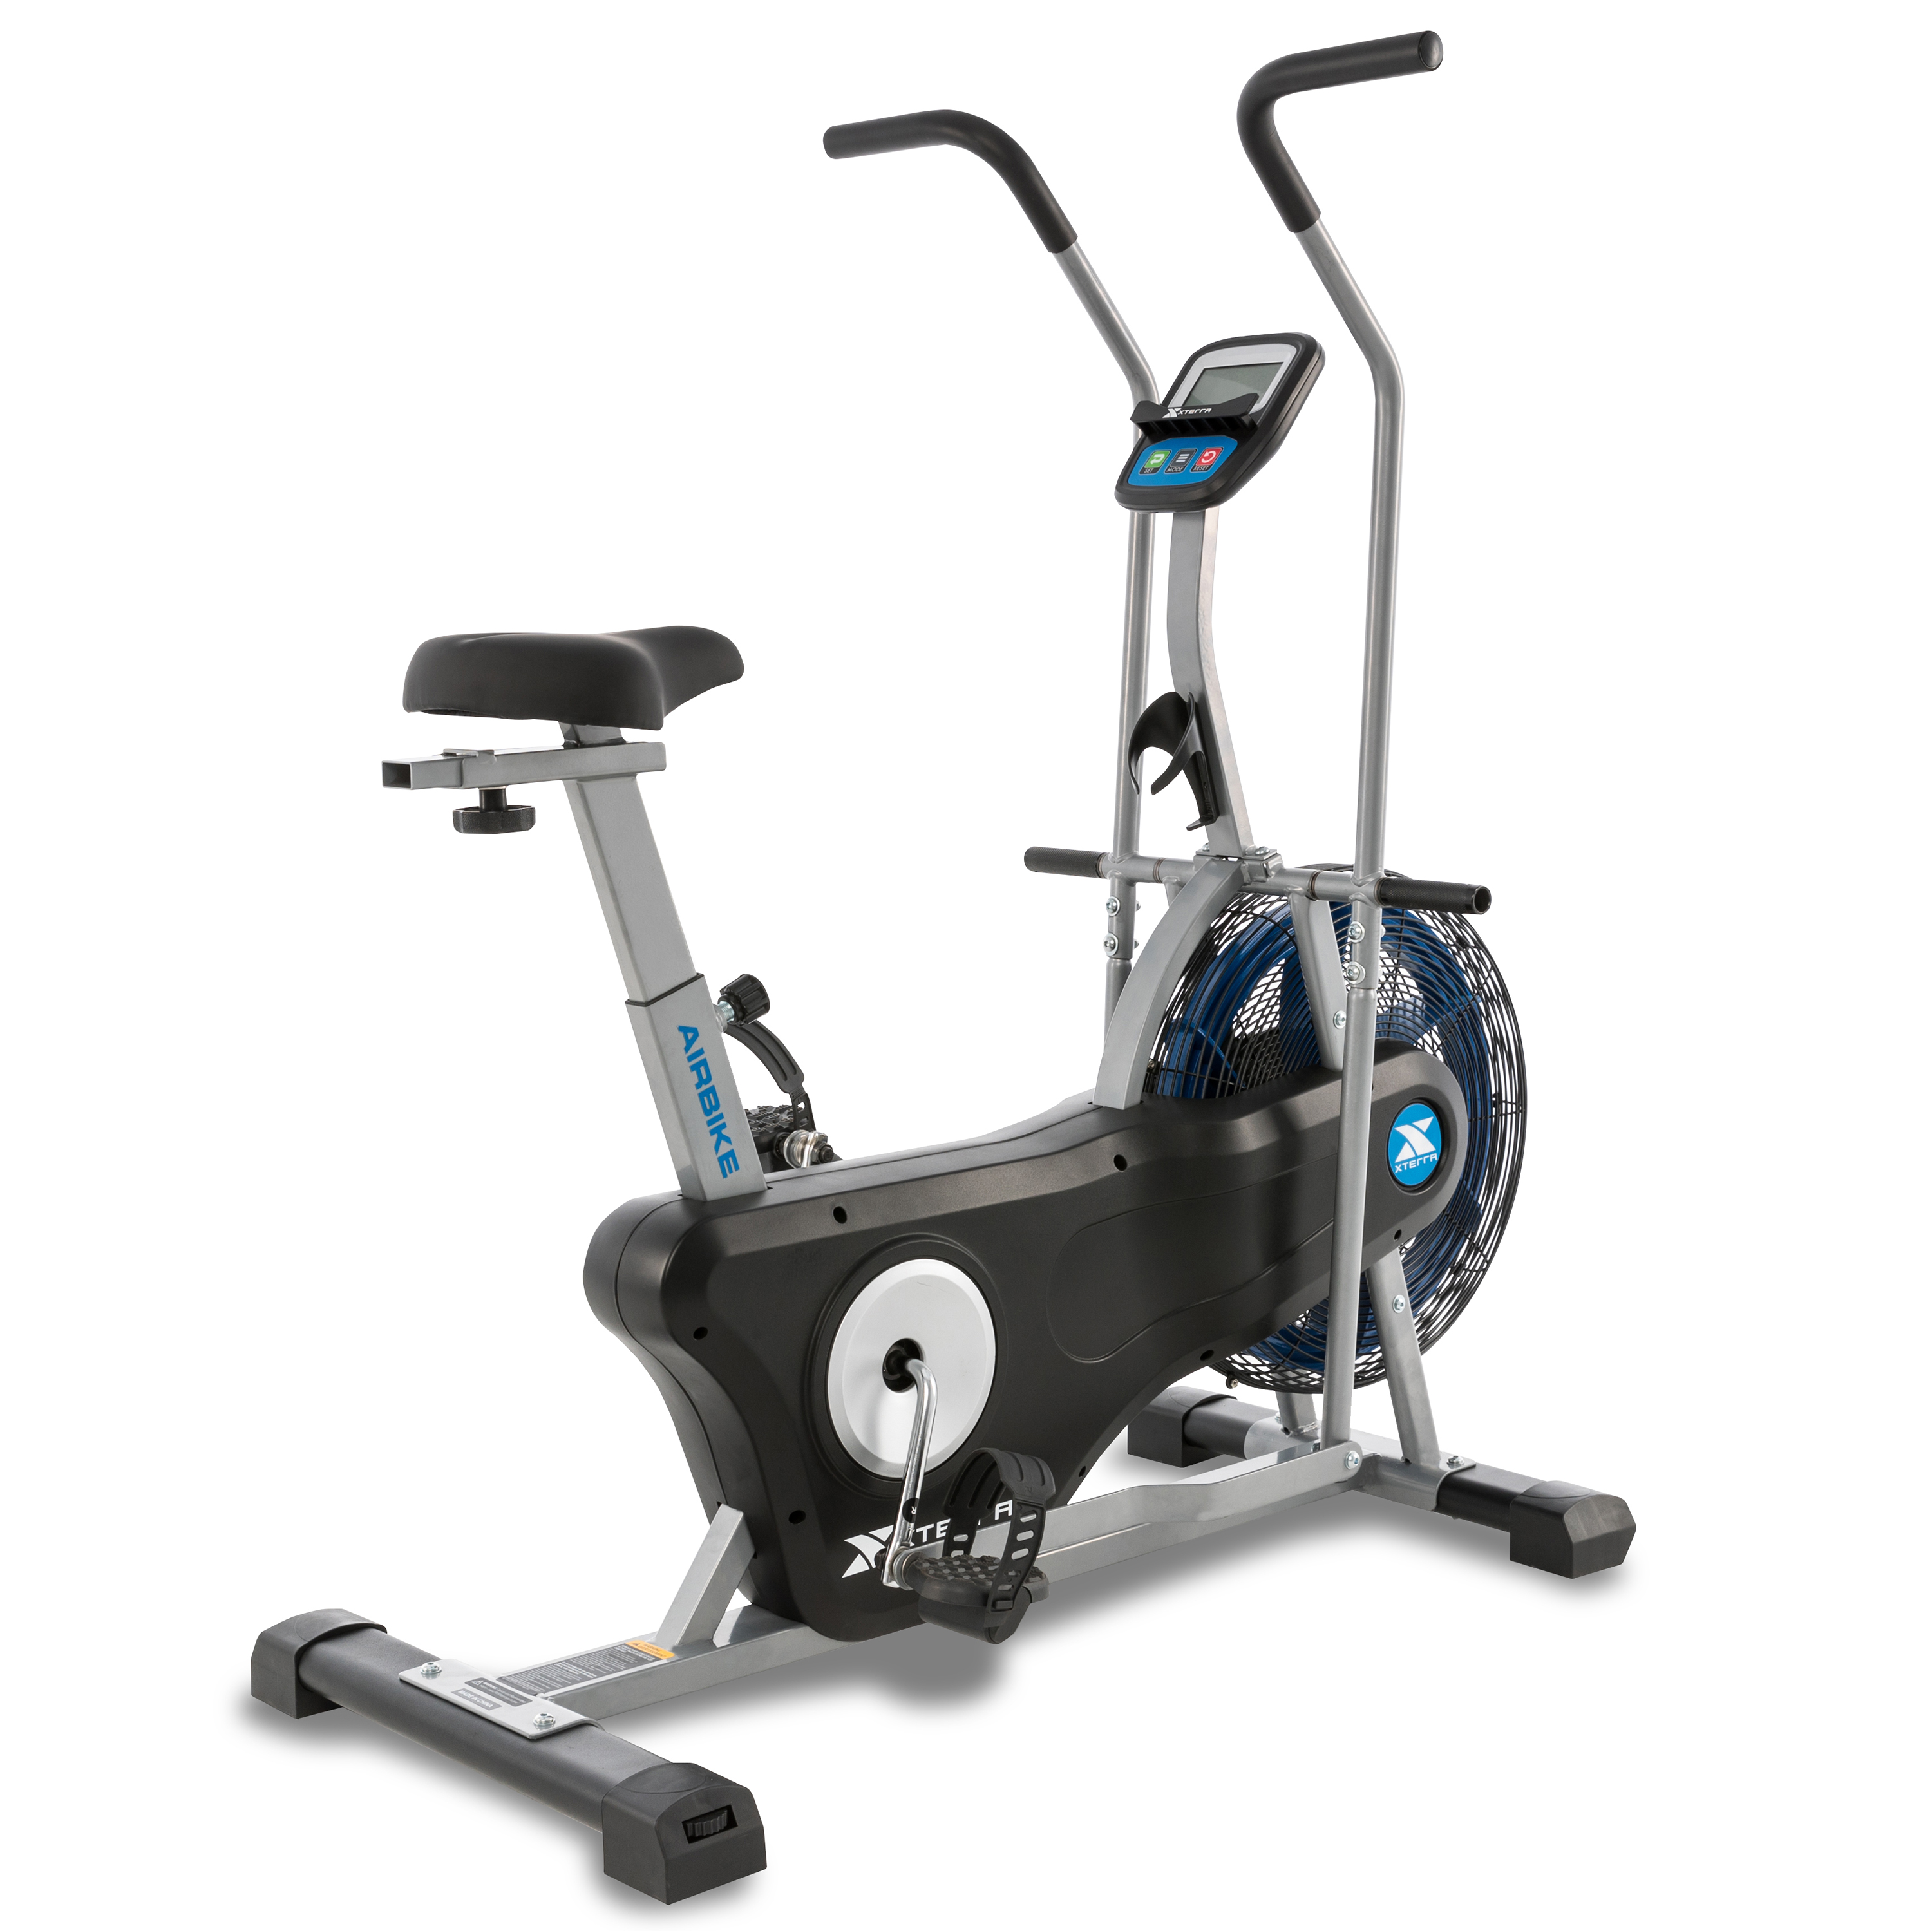 XTERRA Fitness AIR350 Low Impact Full Body Workout Exercise Bike with Wind Resistance and LCD Display - image 1 of 9